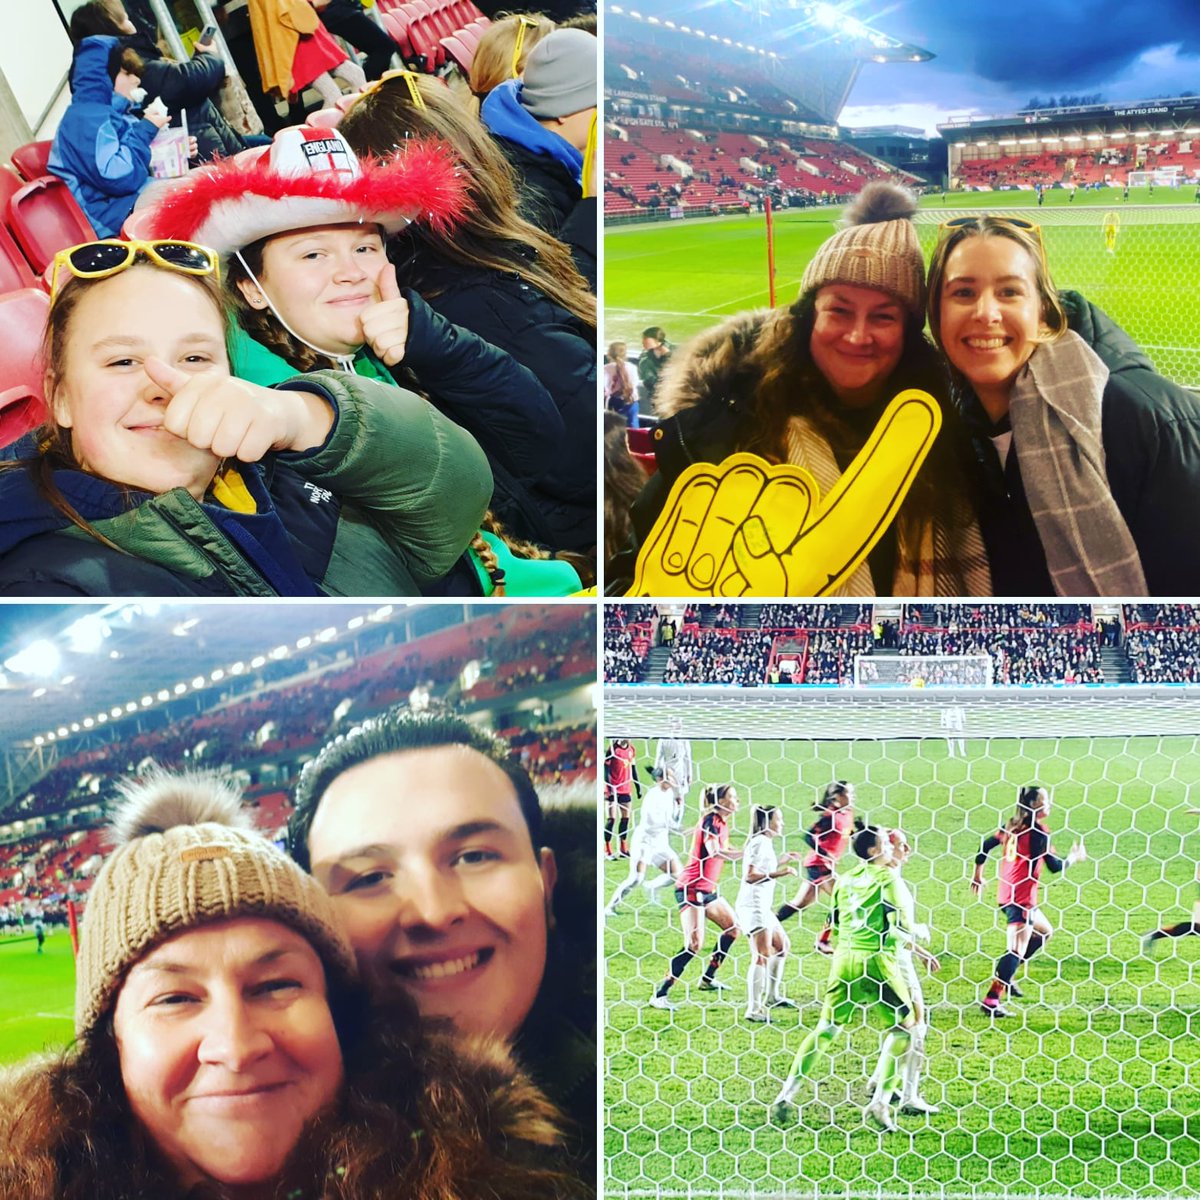 There's no disappointment when following @lionesses 😊Another fine performance from the women last night.They're on 🔥 112 of us from CTLFC Youth made the trip to Ashton Gate for the double header!Really excited for the World Cup 🤗 #arnoldclarkcup #lionesses #CTLFCYOUTH